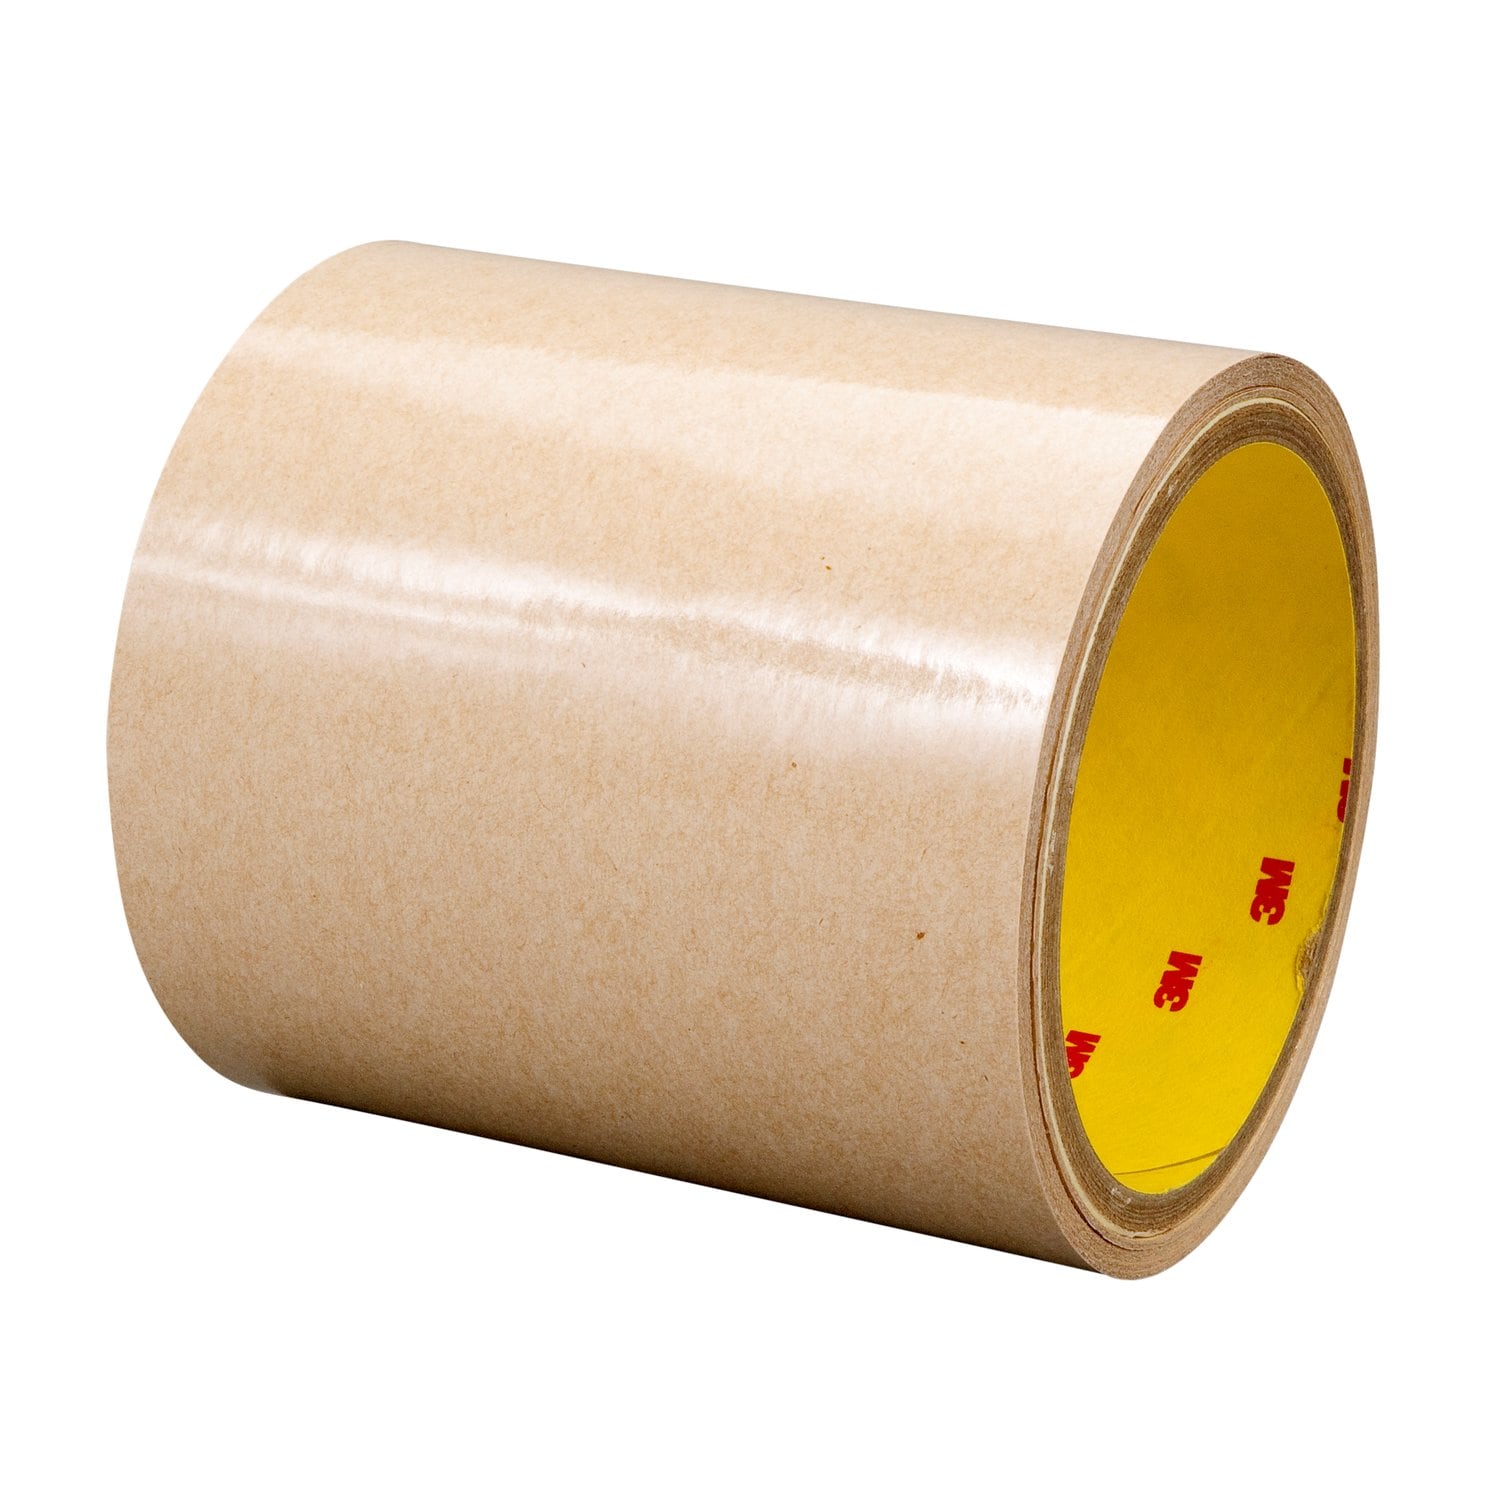 7010375153 - 3M Adhesive Transfer Tape 9626, Clear, 54 in x 180 yd, 2 mil, 1 roll
per case